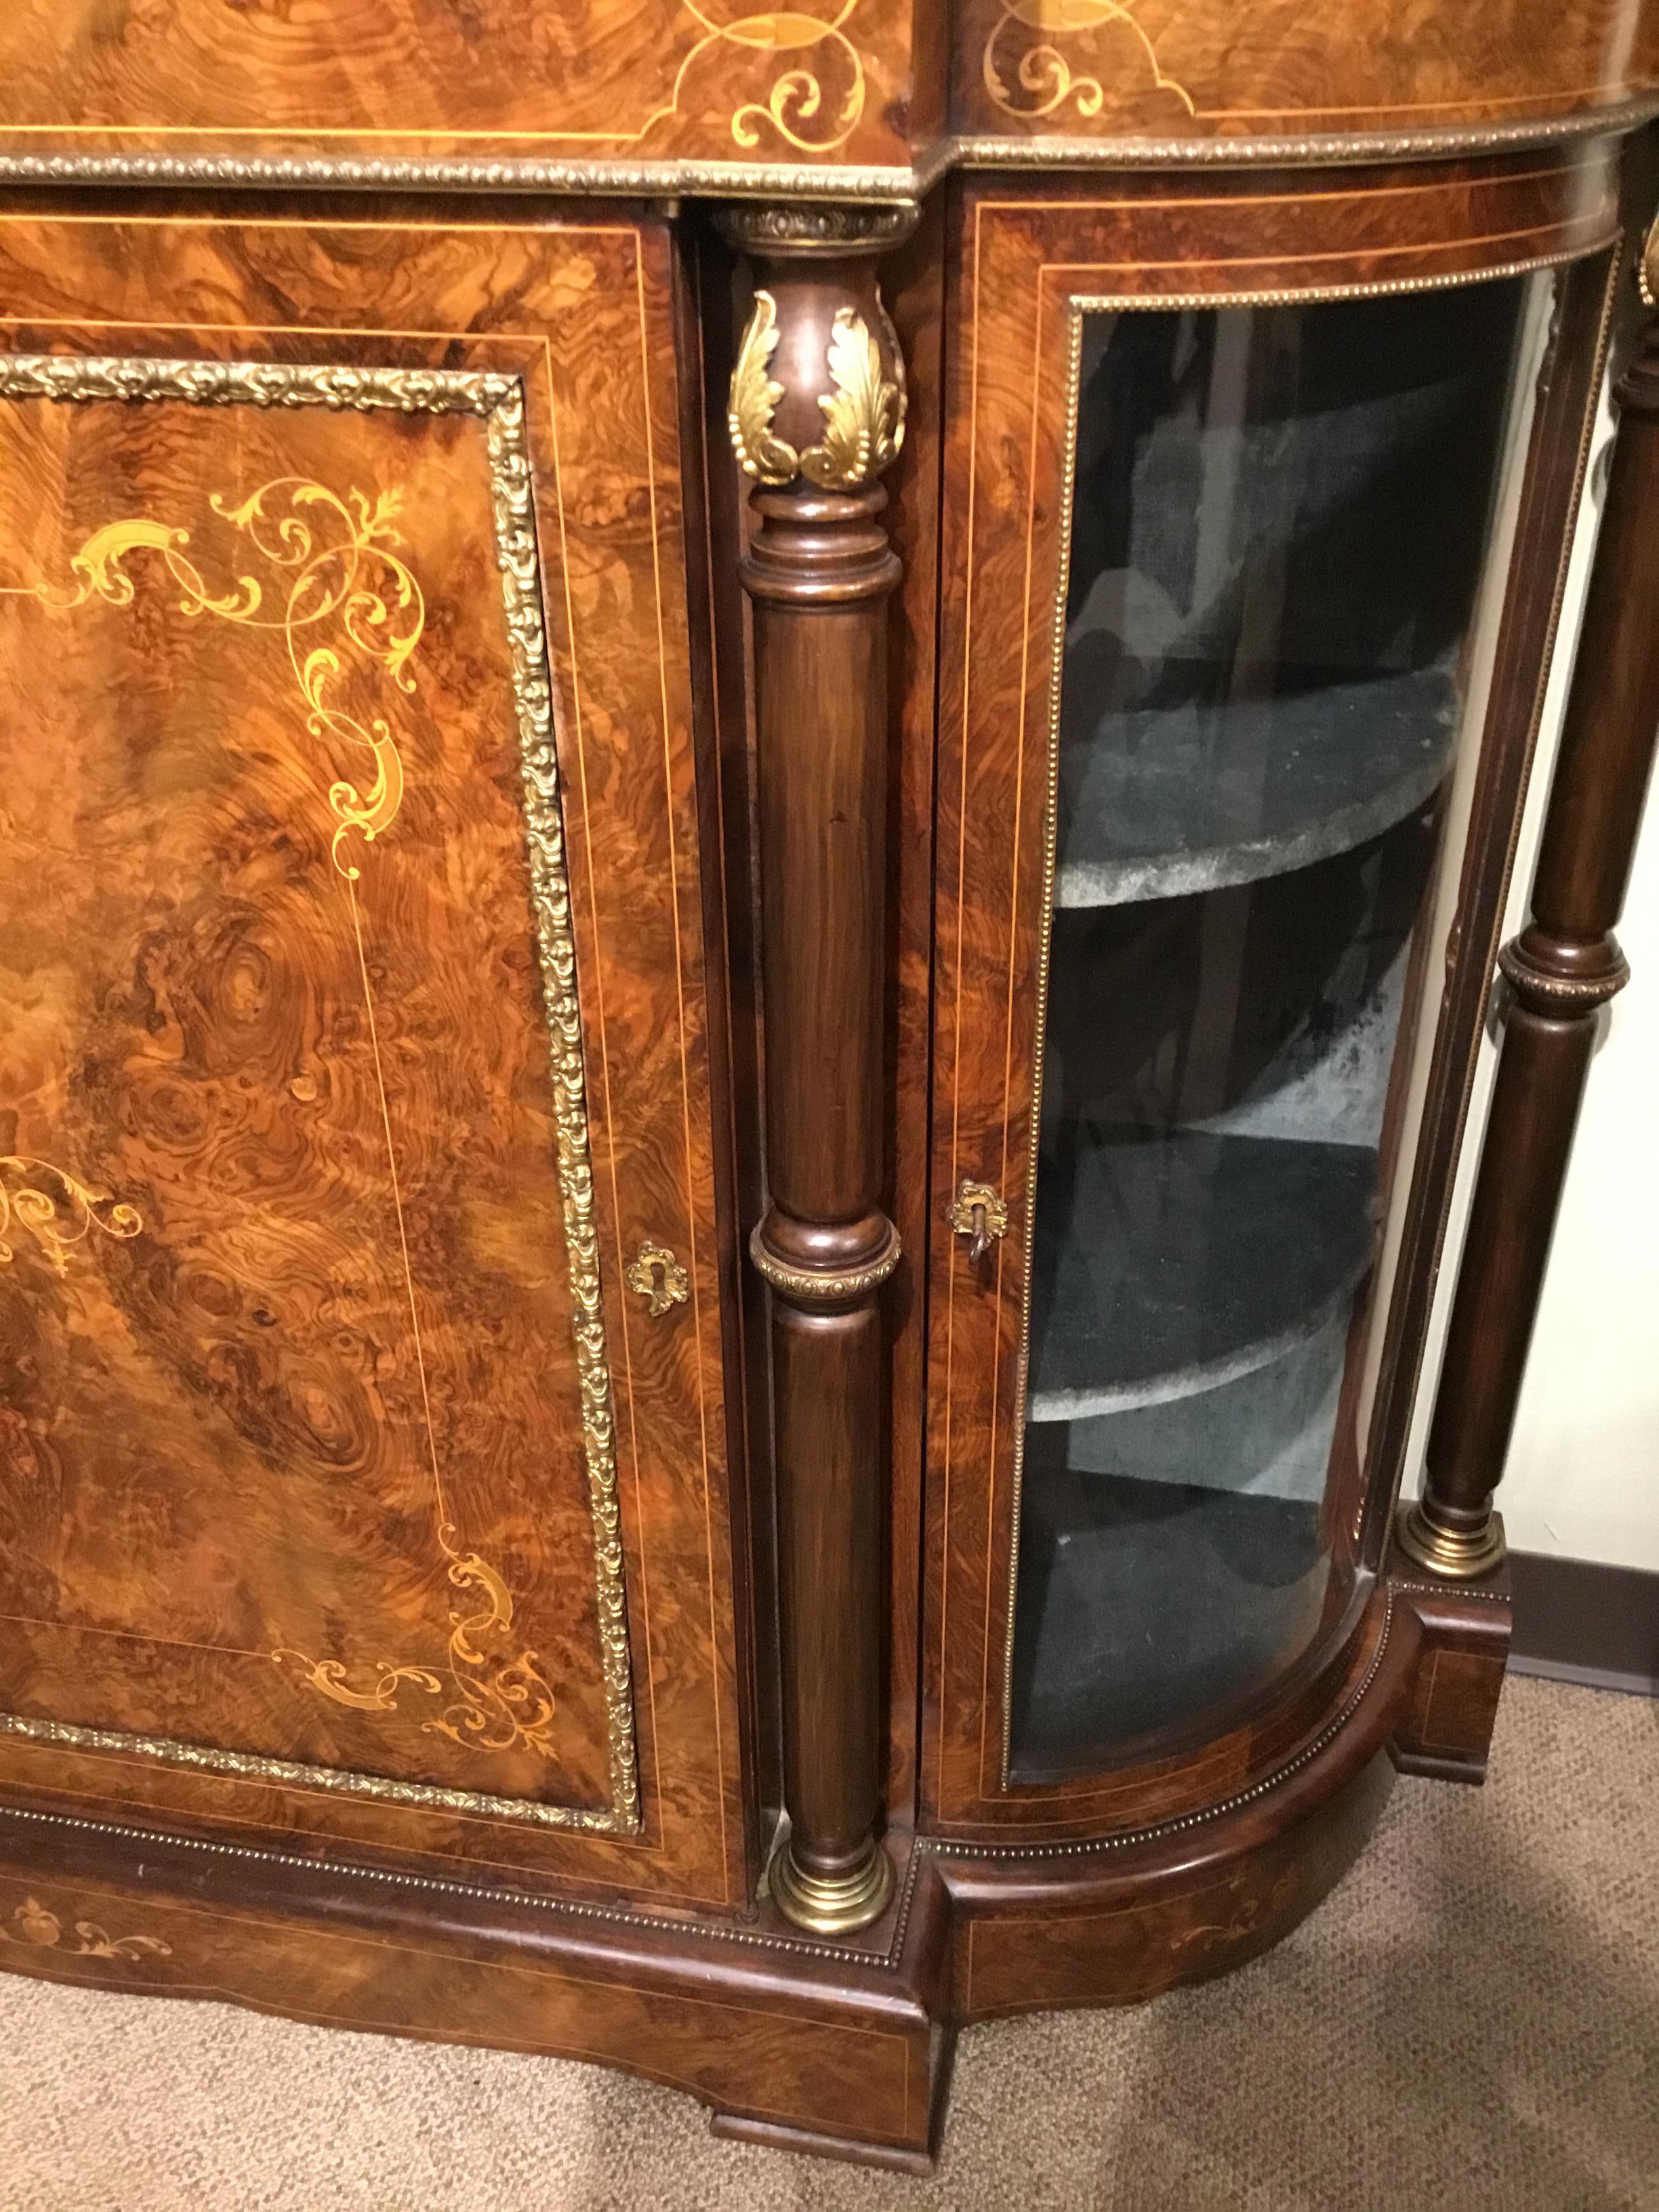 Antique burled walnut cabinet in lovely condition with side opening glazed doors for display.
The center door opens with original locks for storage. The cabinet has been polished and has
a beautiful patina. Columns down each side enhance the look.